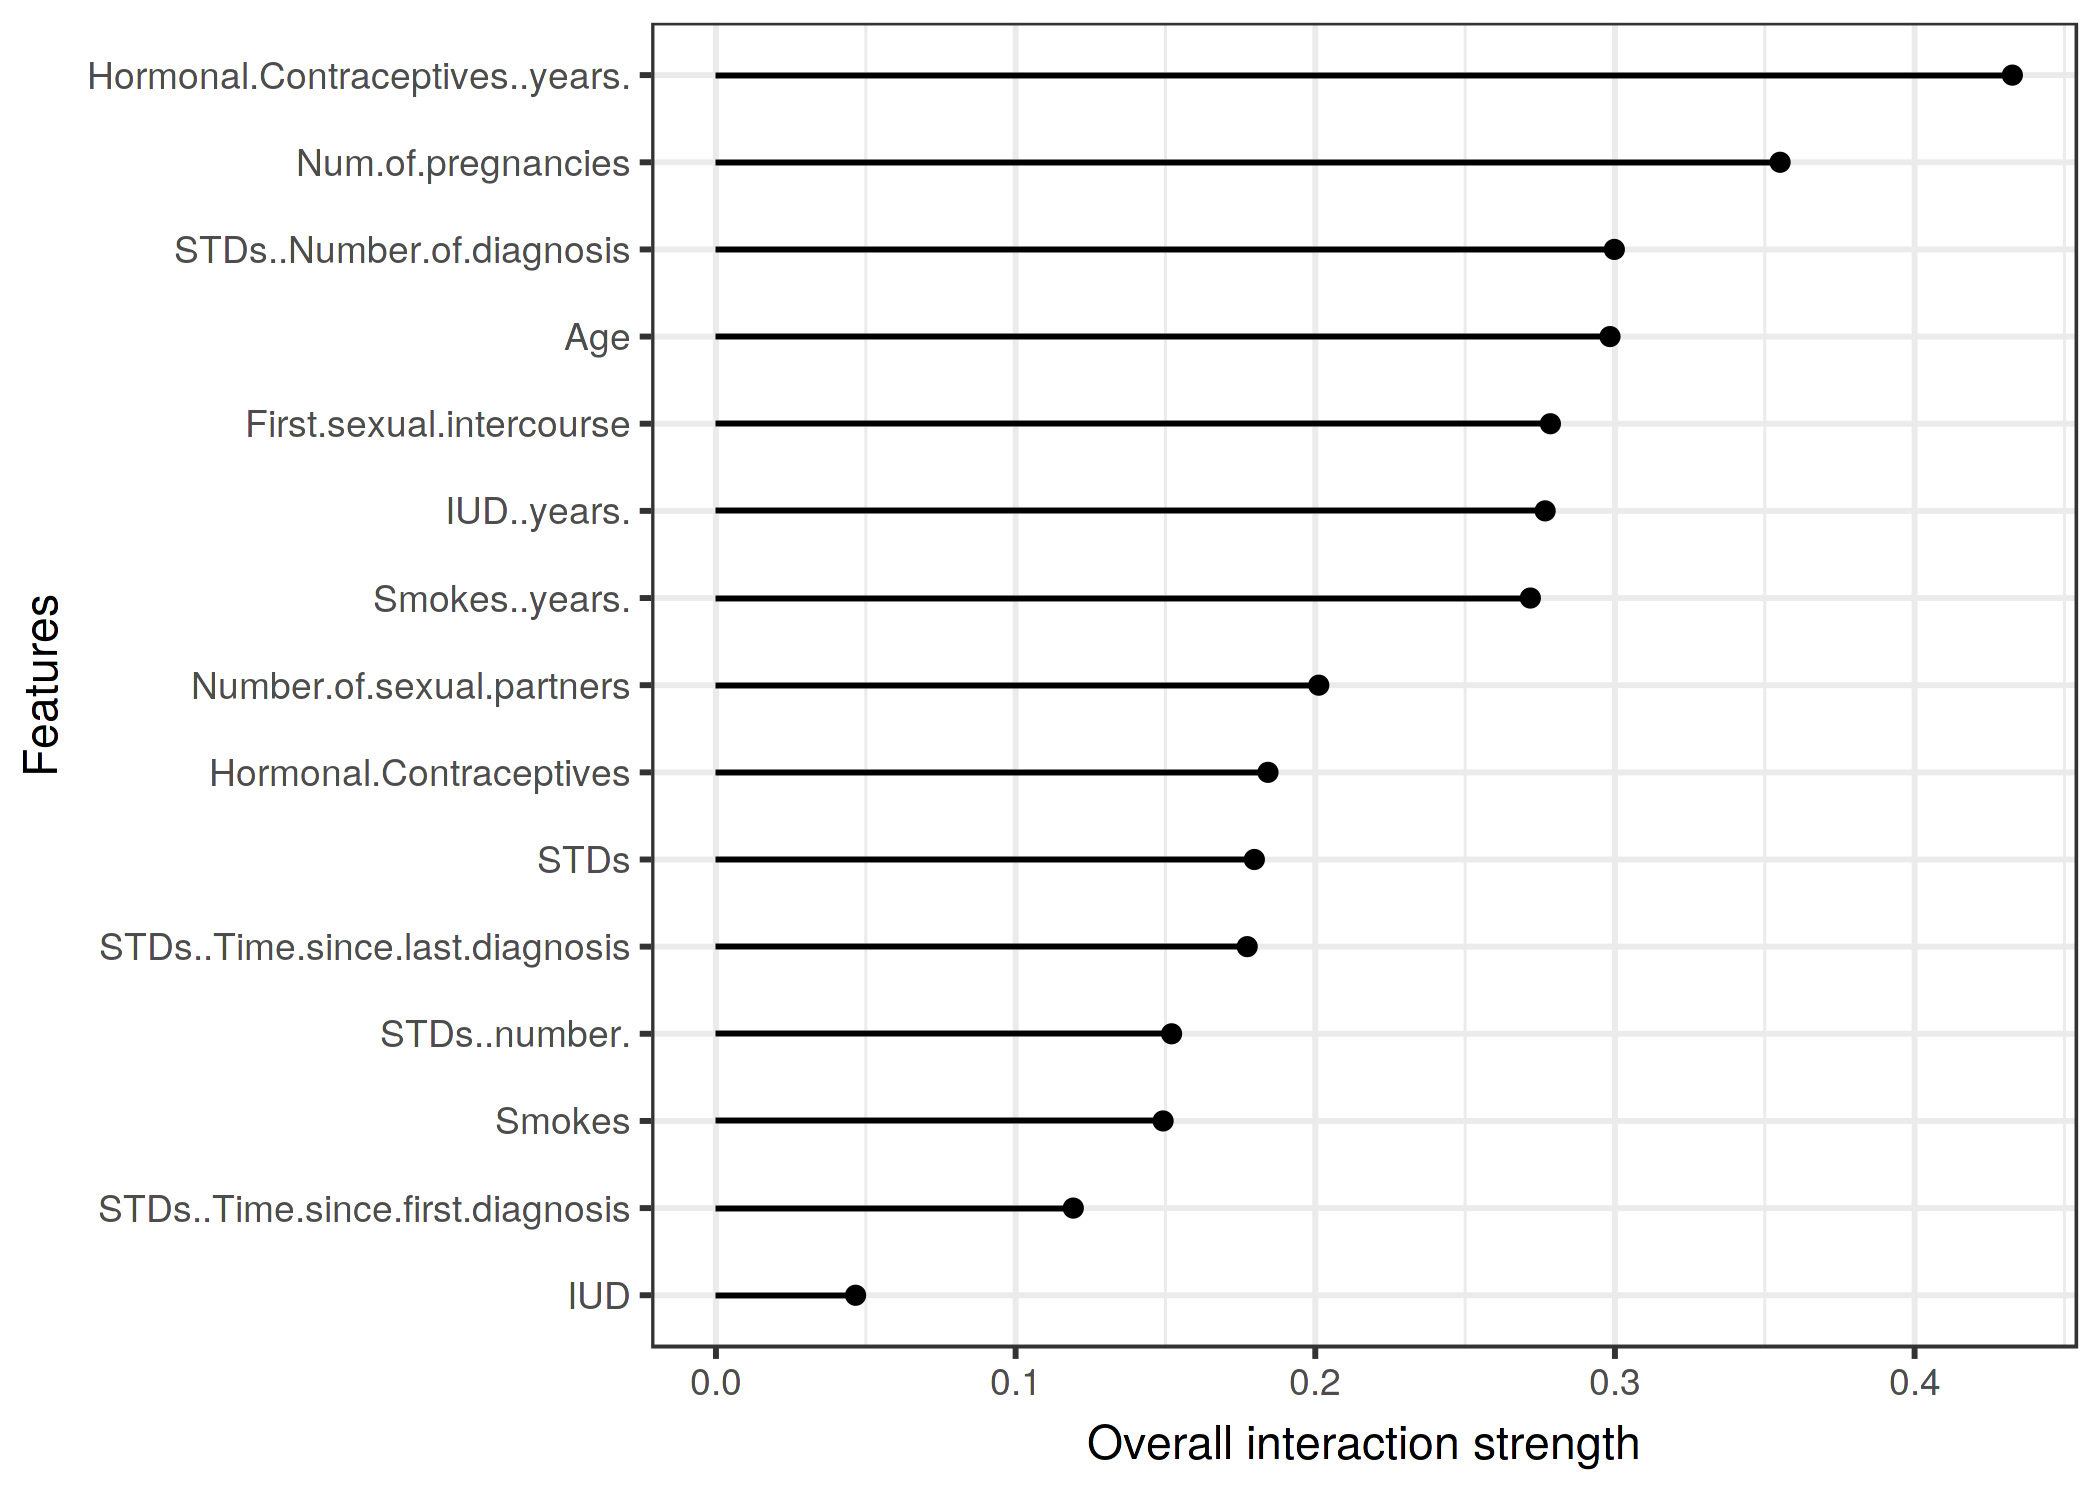 The interaction strength (H-statistic) for each feature with all other features for a random forest predicting the probability of cervical cancer. The years on hormonal contraceptives has the highest relative interaction effect with all other features, followed by the number of pregnancies.